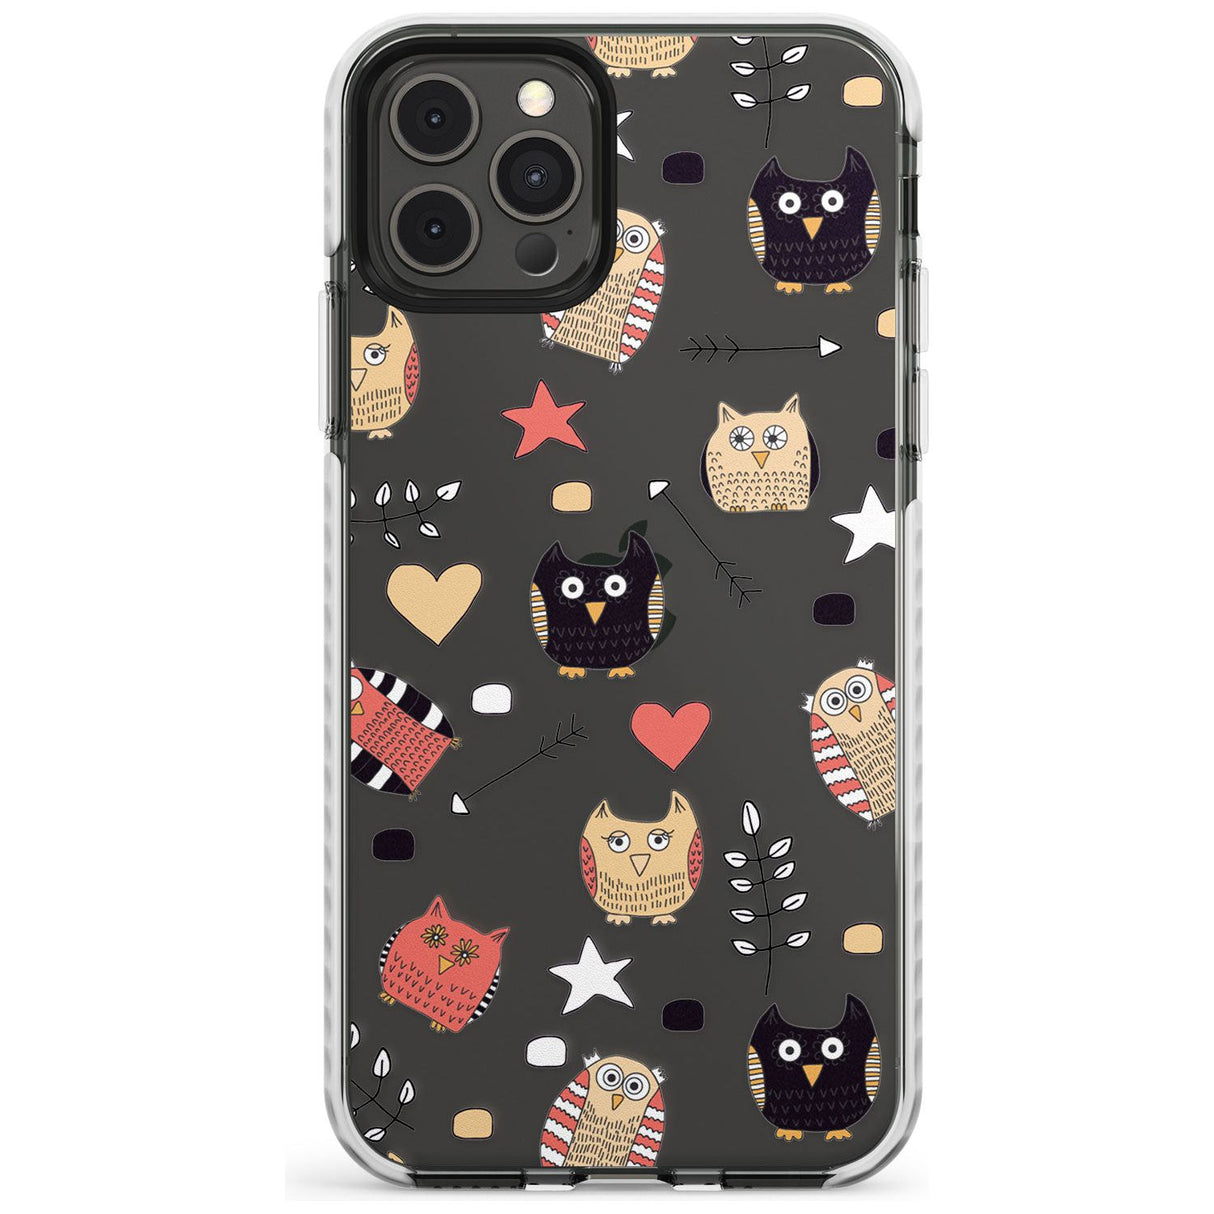 Cute Owl Pattern Impact Phone Case for iPhone 11 Pro Max